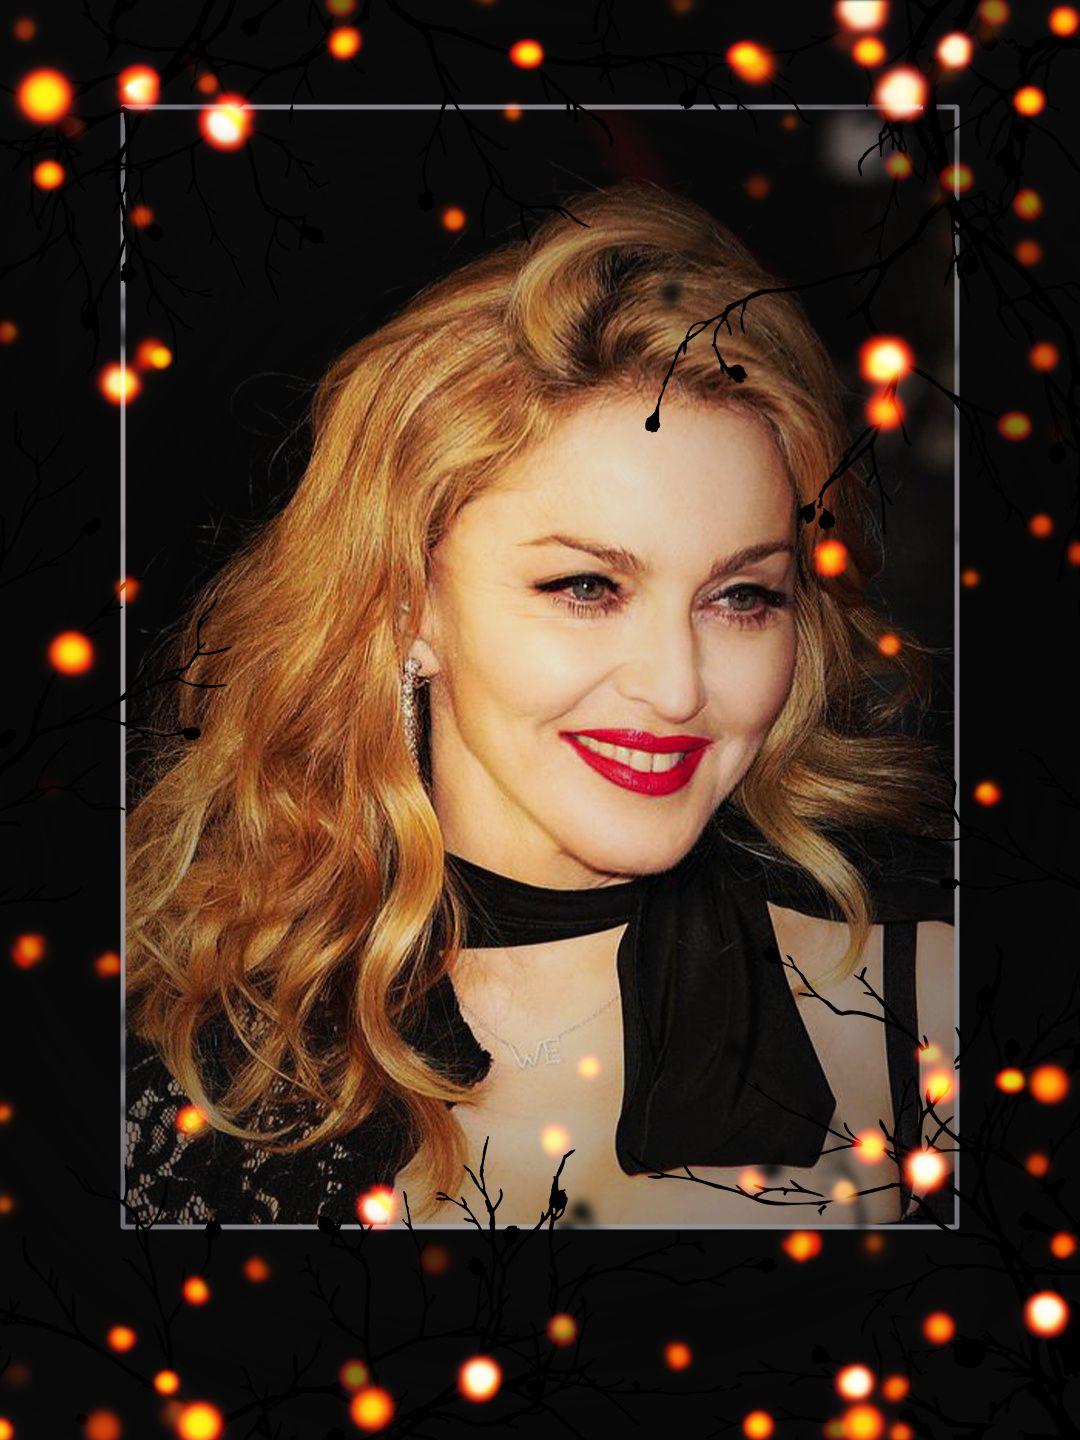 Madonna # 41 - Celeb ART - Beautiful Artworks of Celebrities, Footballers,  Politicians and Famous People in World | OpenSea